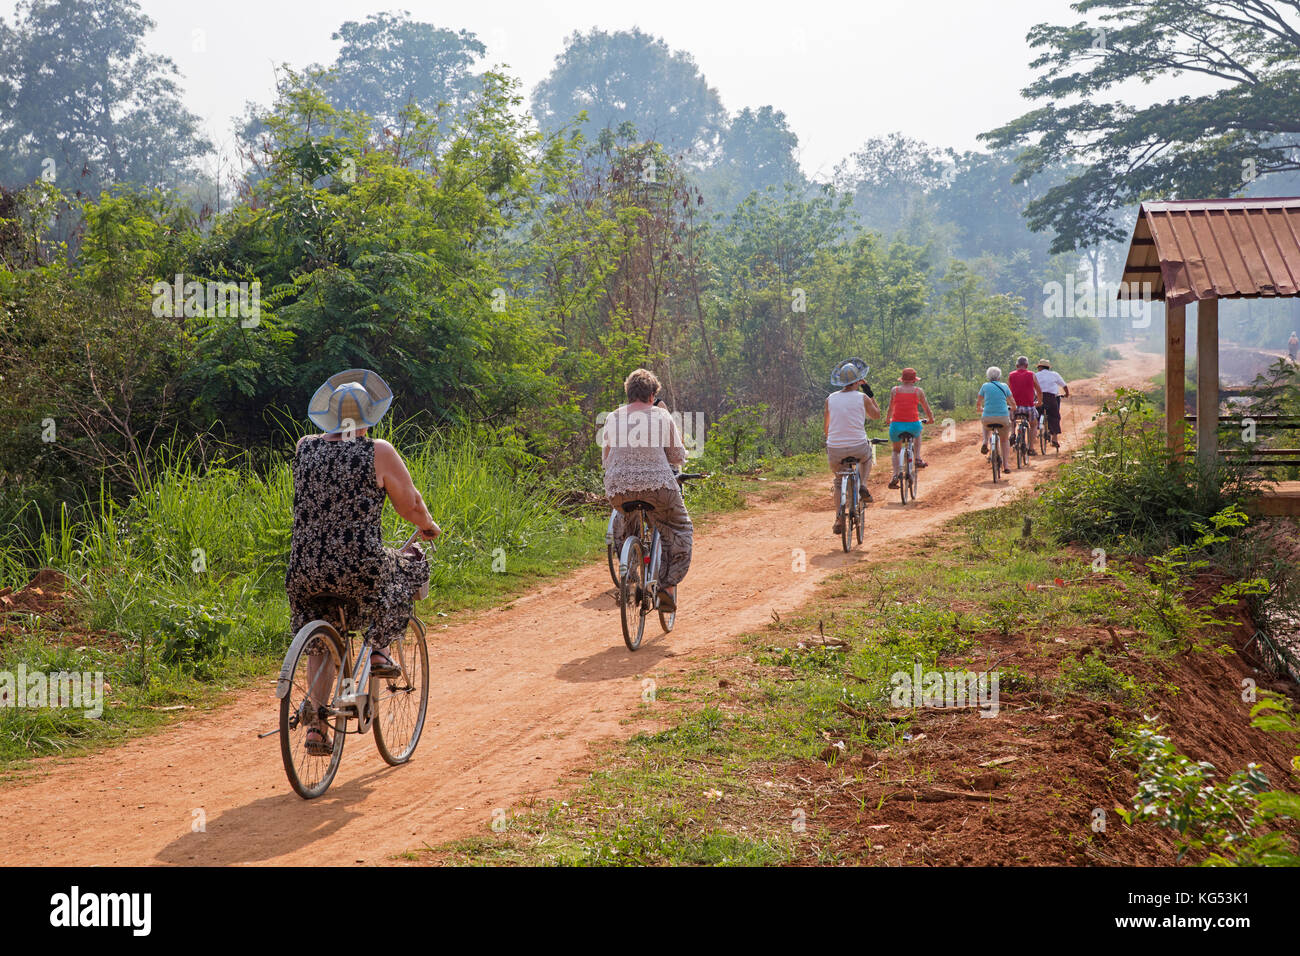 Western tourists cycling on bicycles near the Inle lake in the Nyaungshwe Township of Taunggyi District, Shan State, Myanmar / Burma Stock Photo